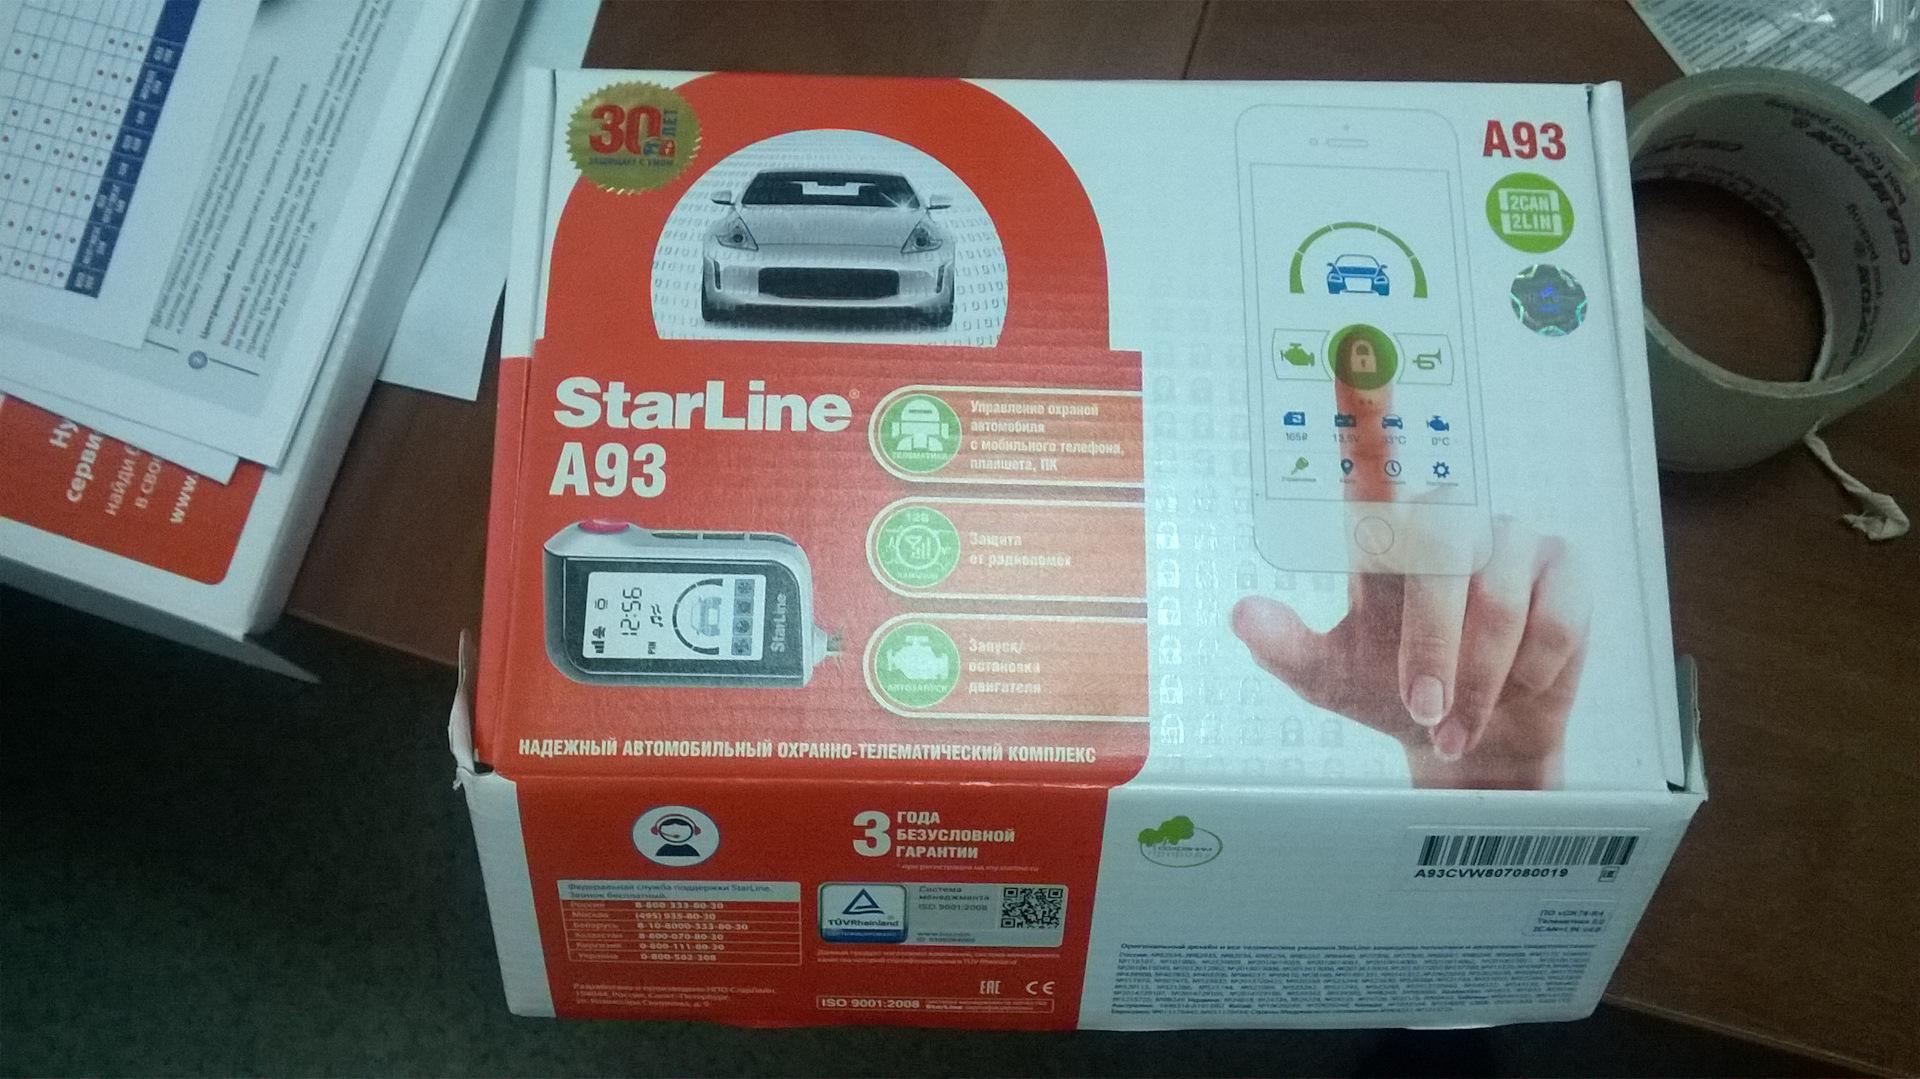 Starline 2can 2lin gsm. Старлайн а 93 2 Кан 2 Лин. STARLINE a93 2can+2lin брелок. A93 2can 2lin набор. STARLINE 2can 2lin Drive 2.